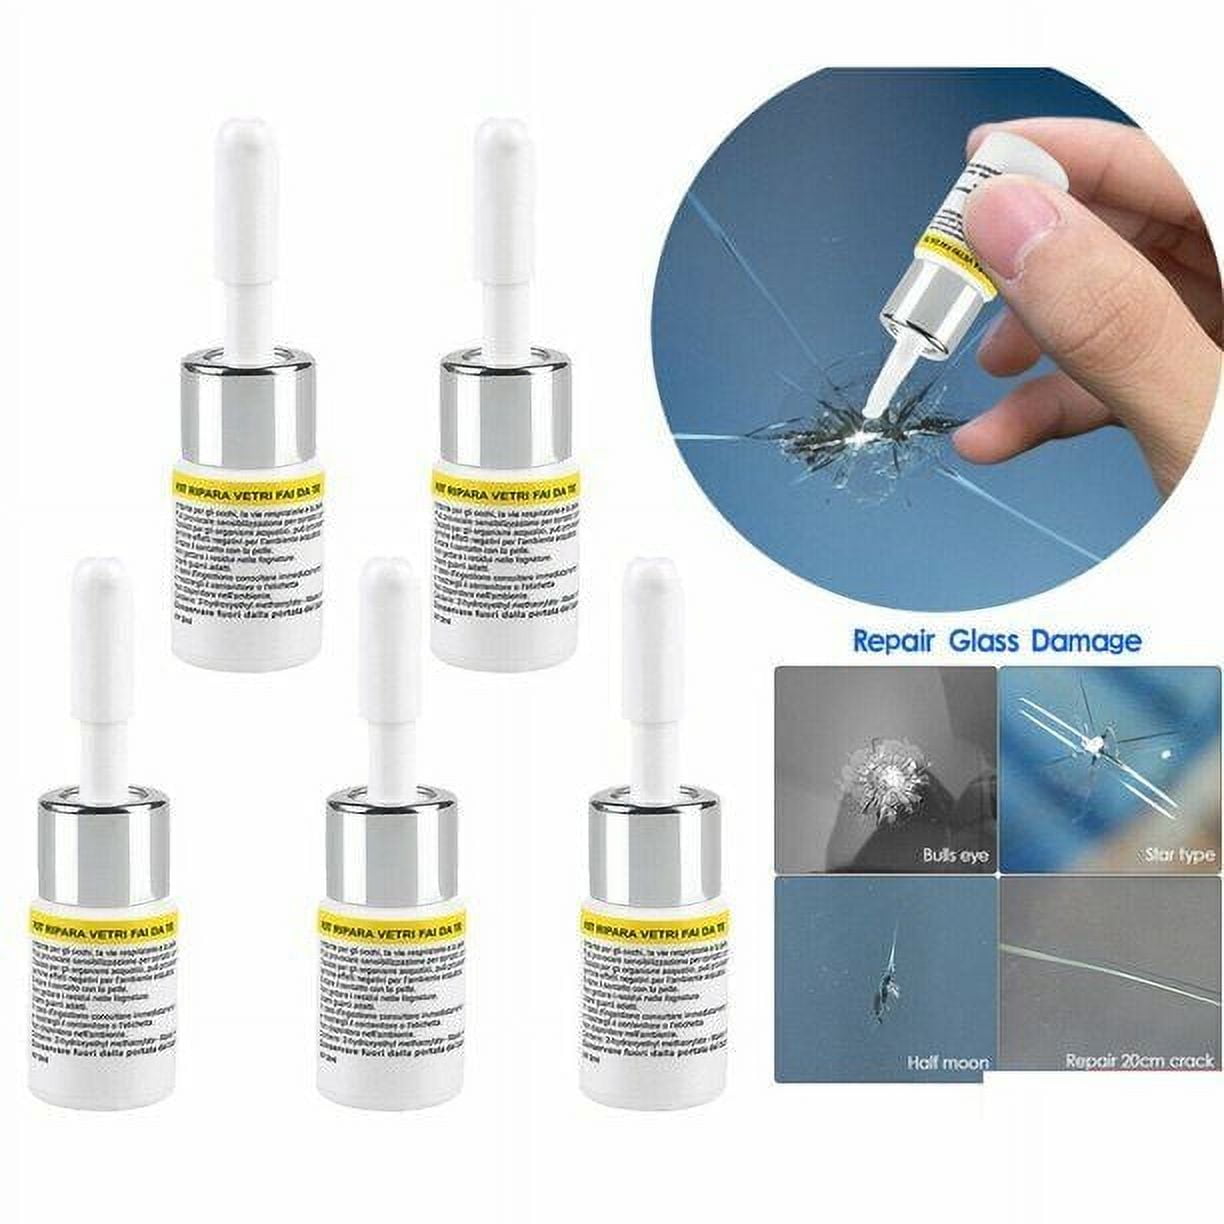 2PCS Auto Glass Nano Repair Solution Phone Windshield Glass Repair Fluid  Window Scratch Crack Chip Recovery With Blade Stripe L2 - Price history &  Review, AliExpress Seller - HXi-Drive Store